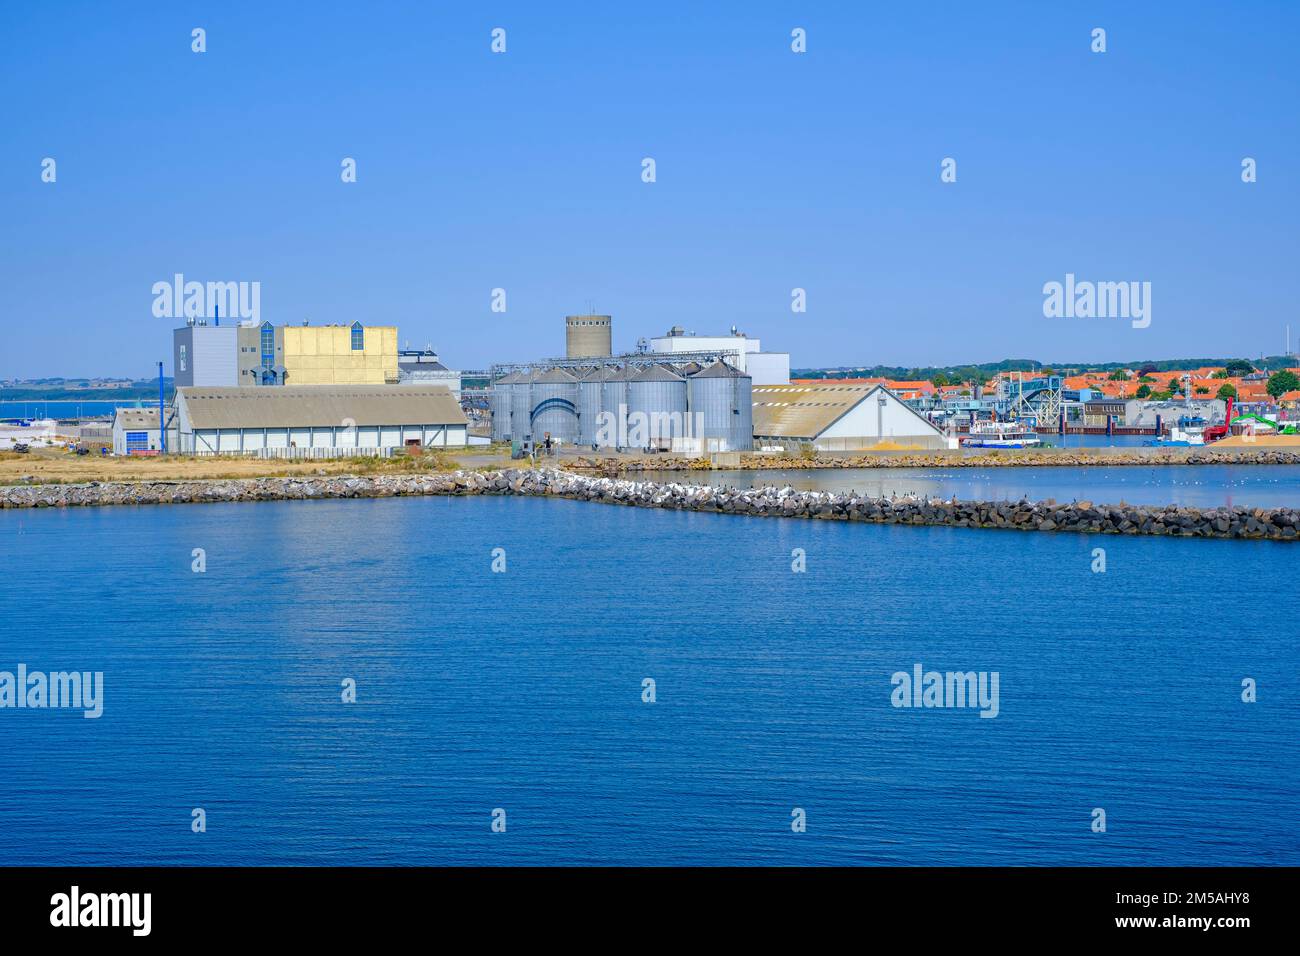 Industrial facility structures in the harbour entrance of Rönne, Bornholm island, Denmark, Scandinavia, Europe. Stock Photo